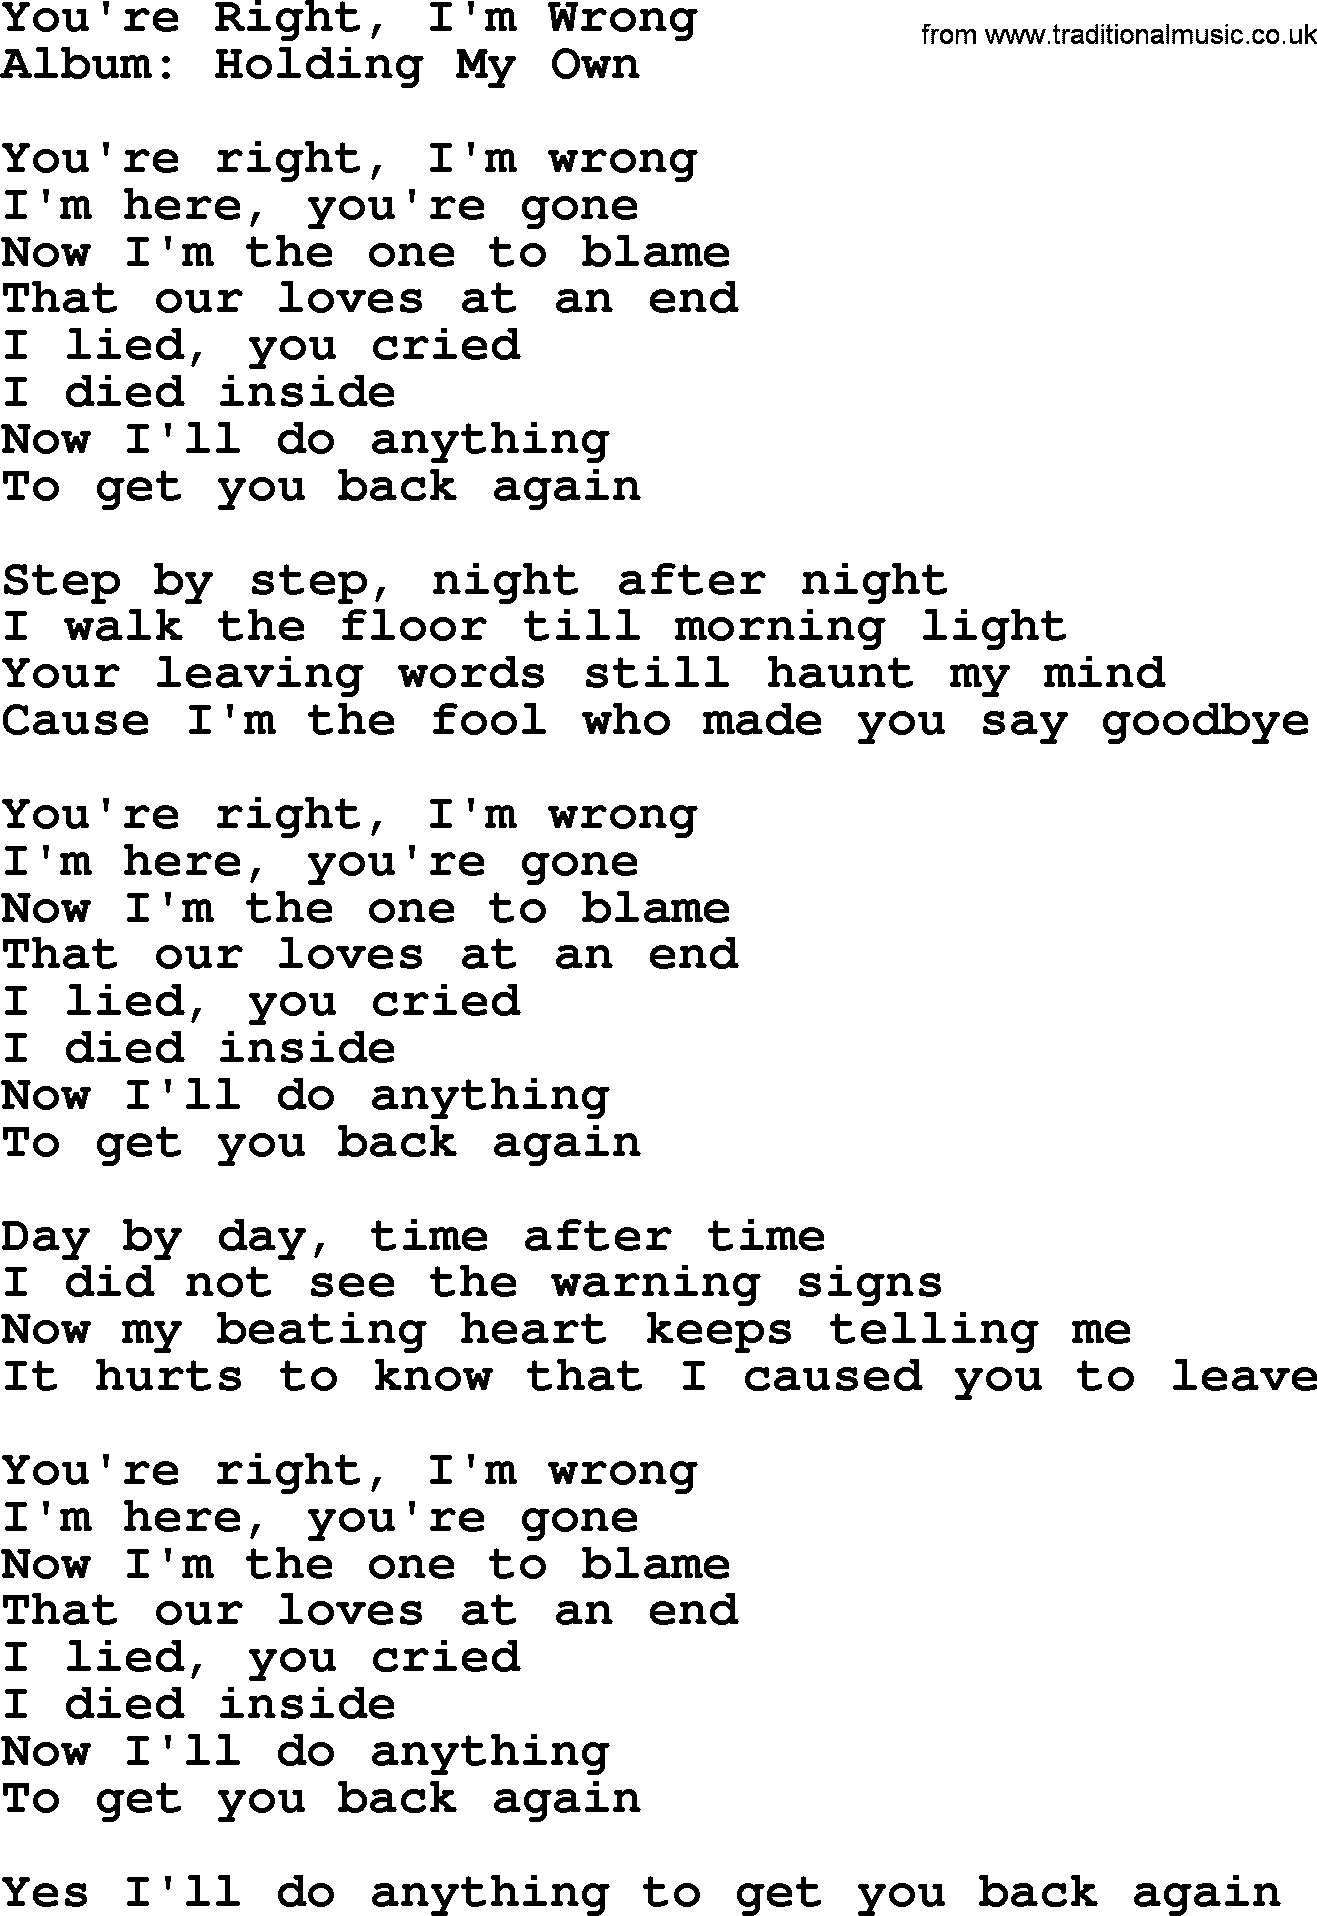 George Strait song: You're Right, I'm Wrong, lyrics